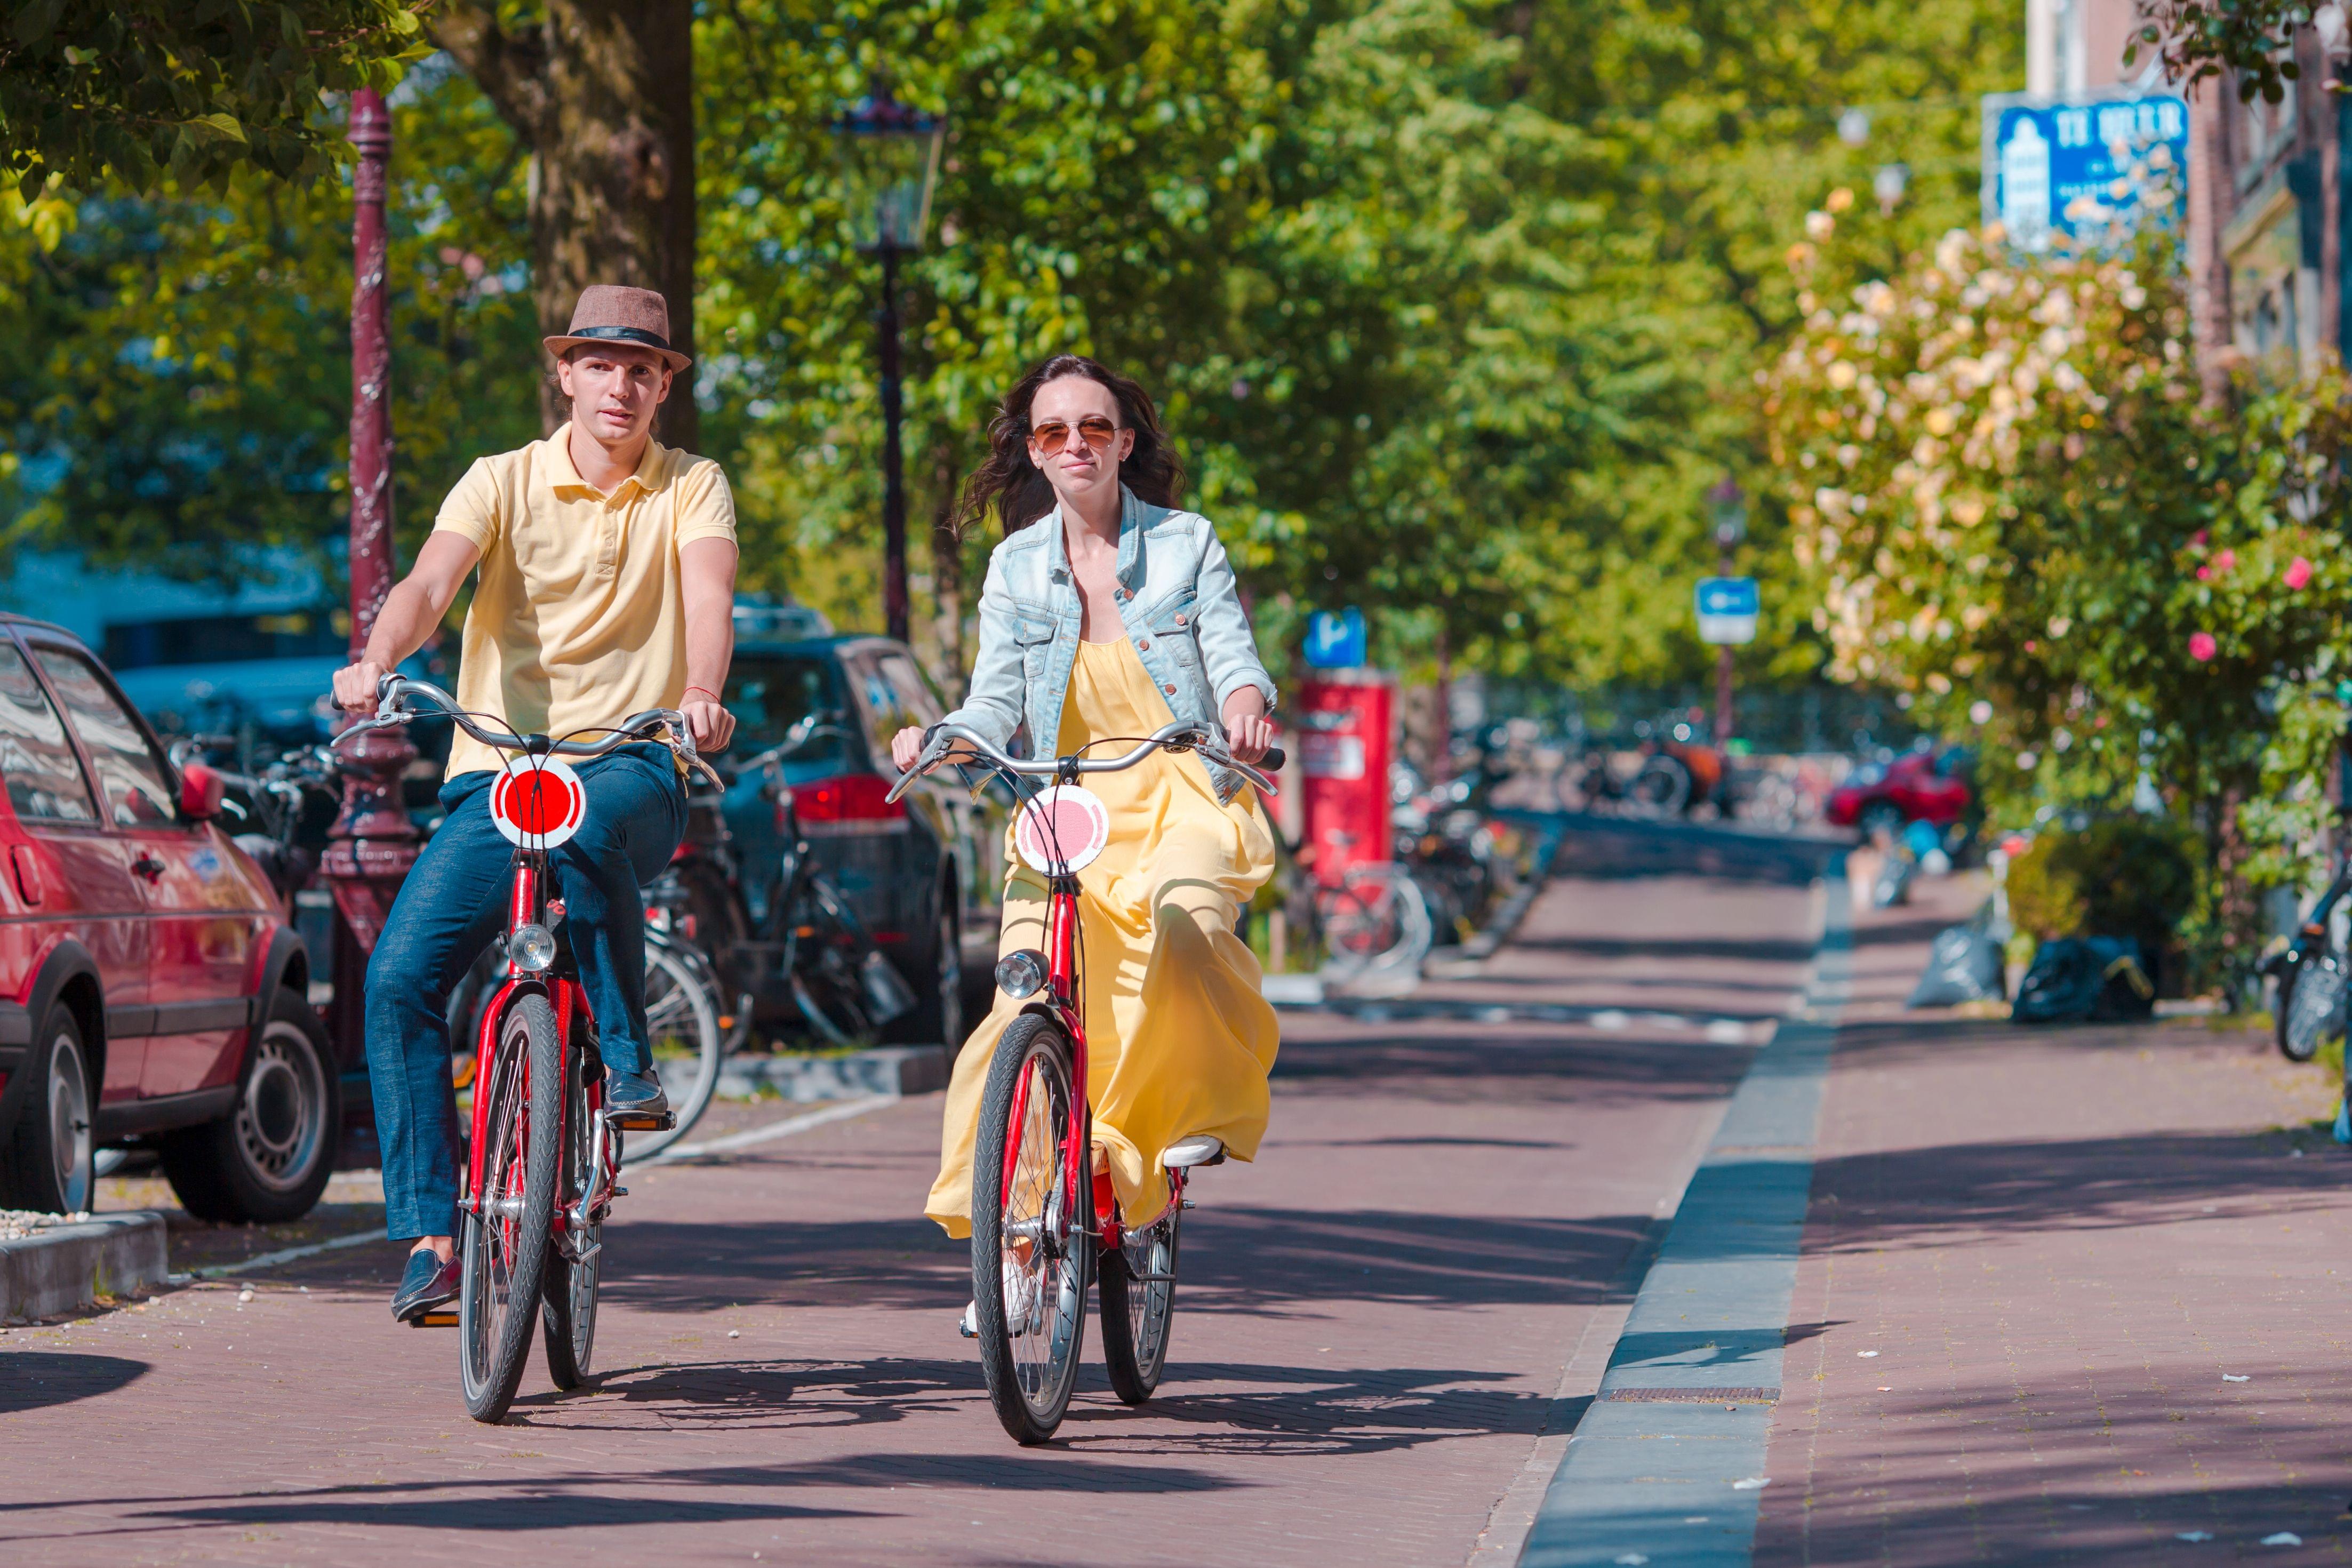 Couples on Bike in Amsterdam